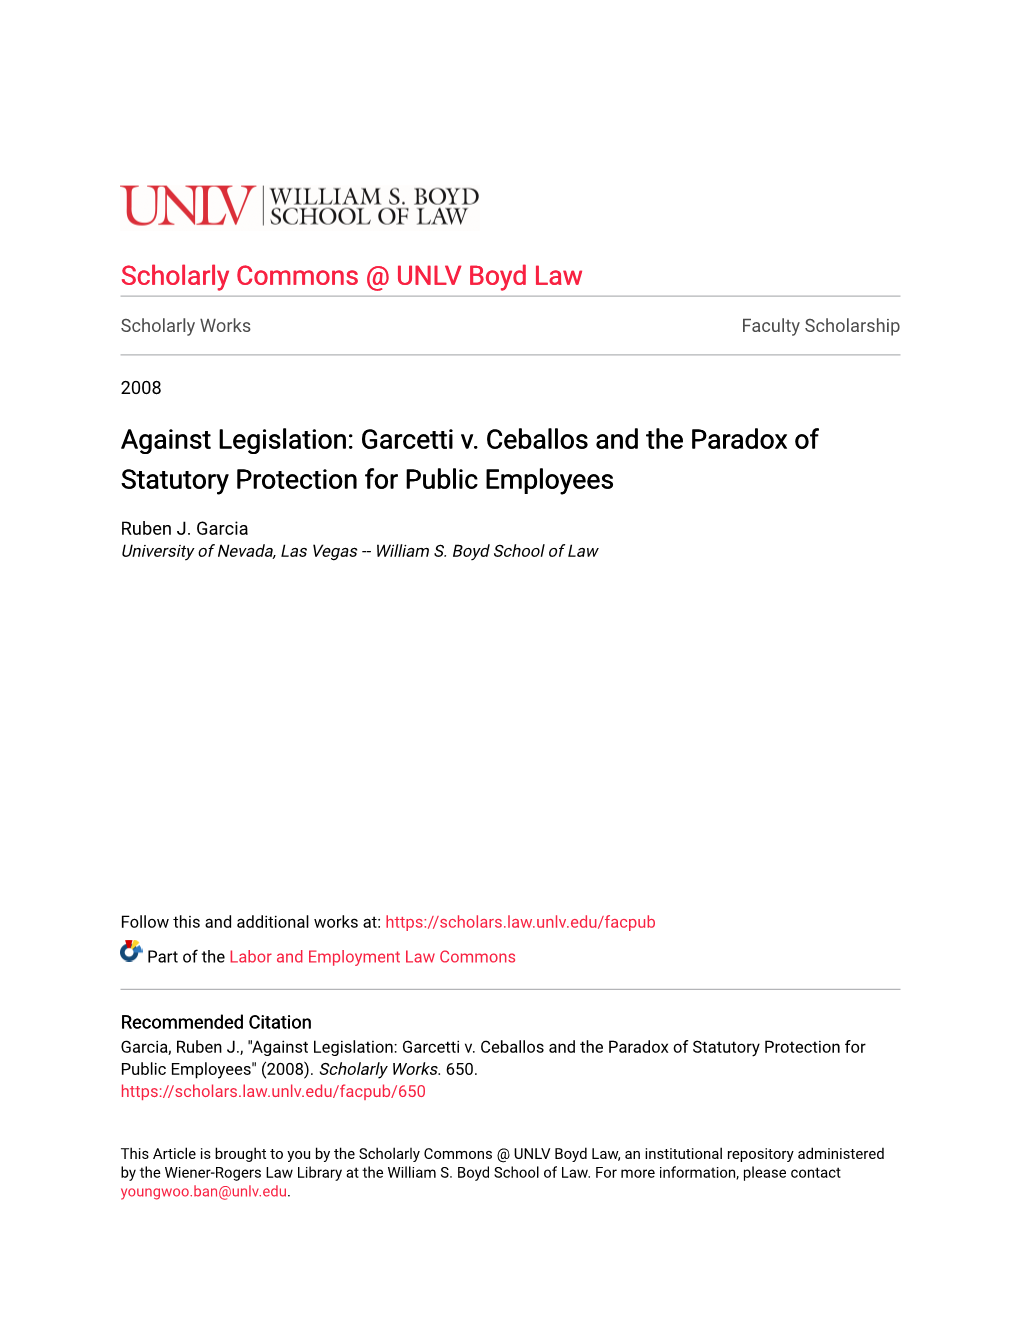 Garcetti V. Ceballos and the Paradox of Statutory Protection for Public Employees